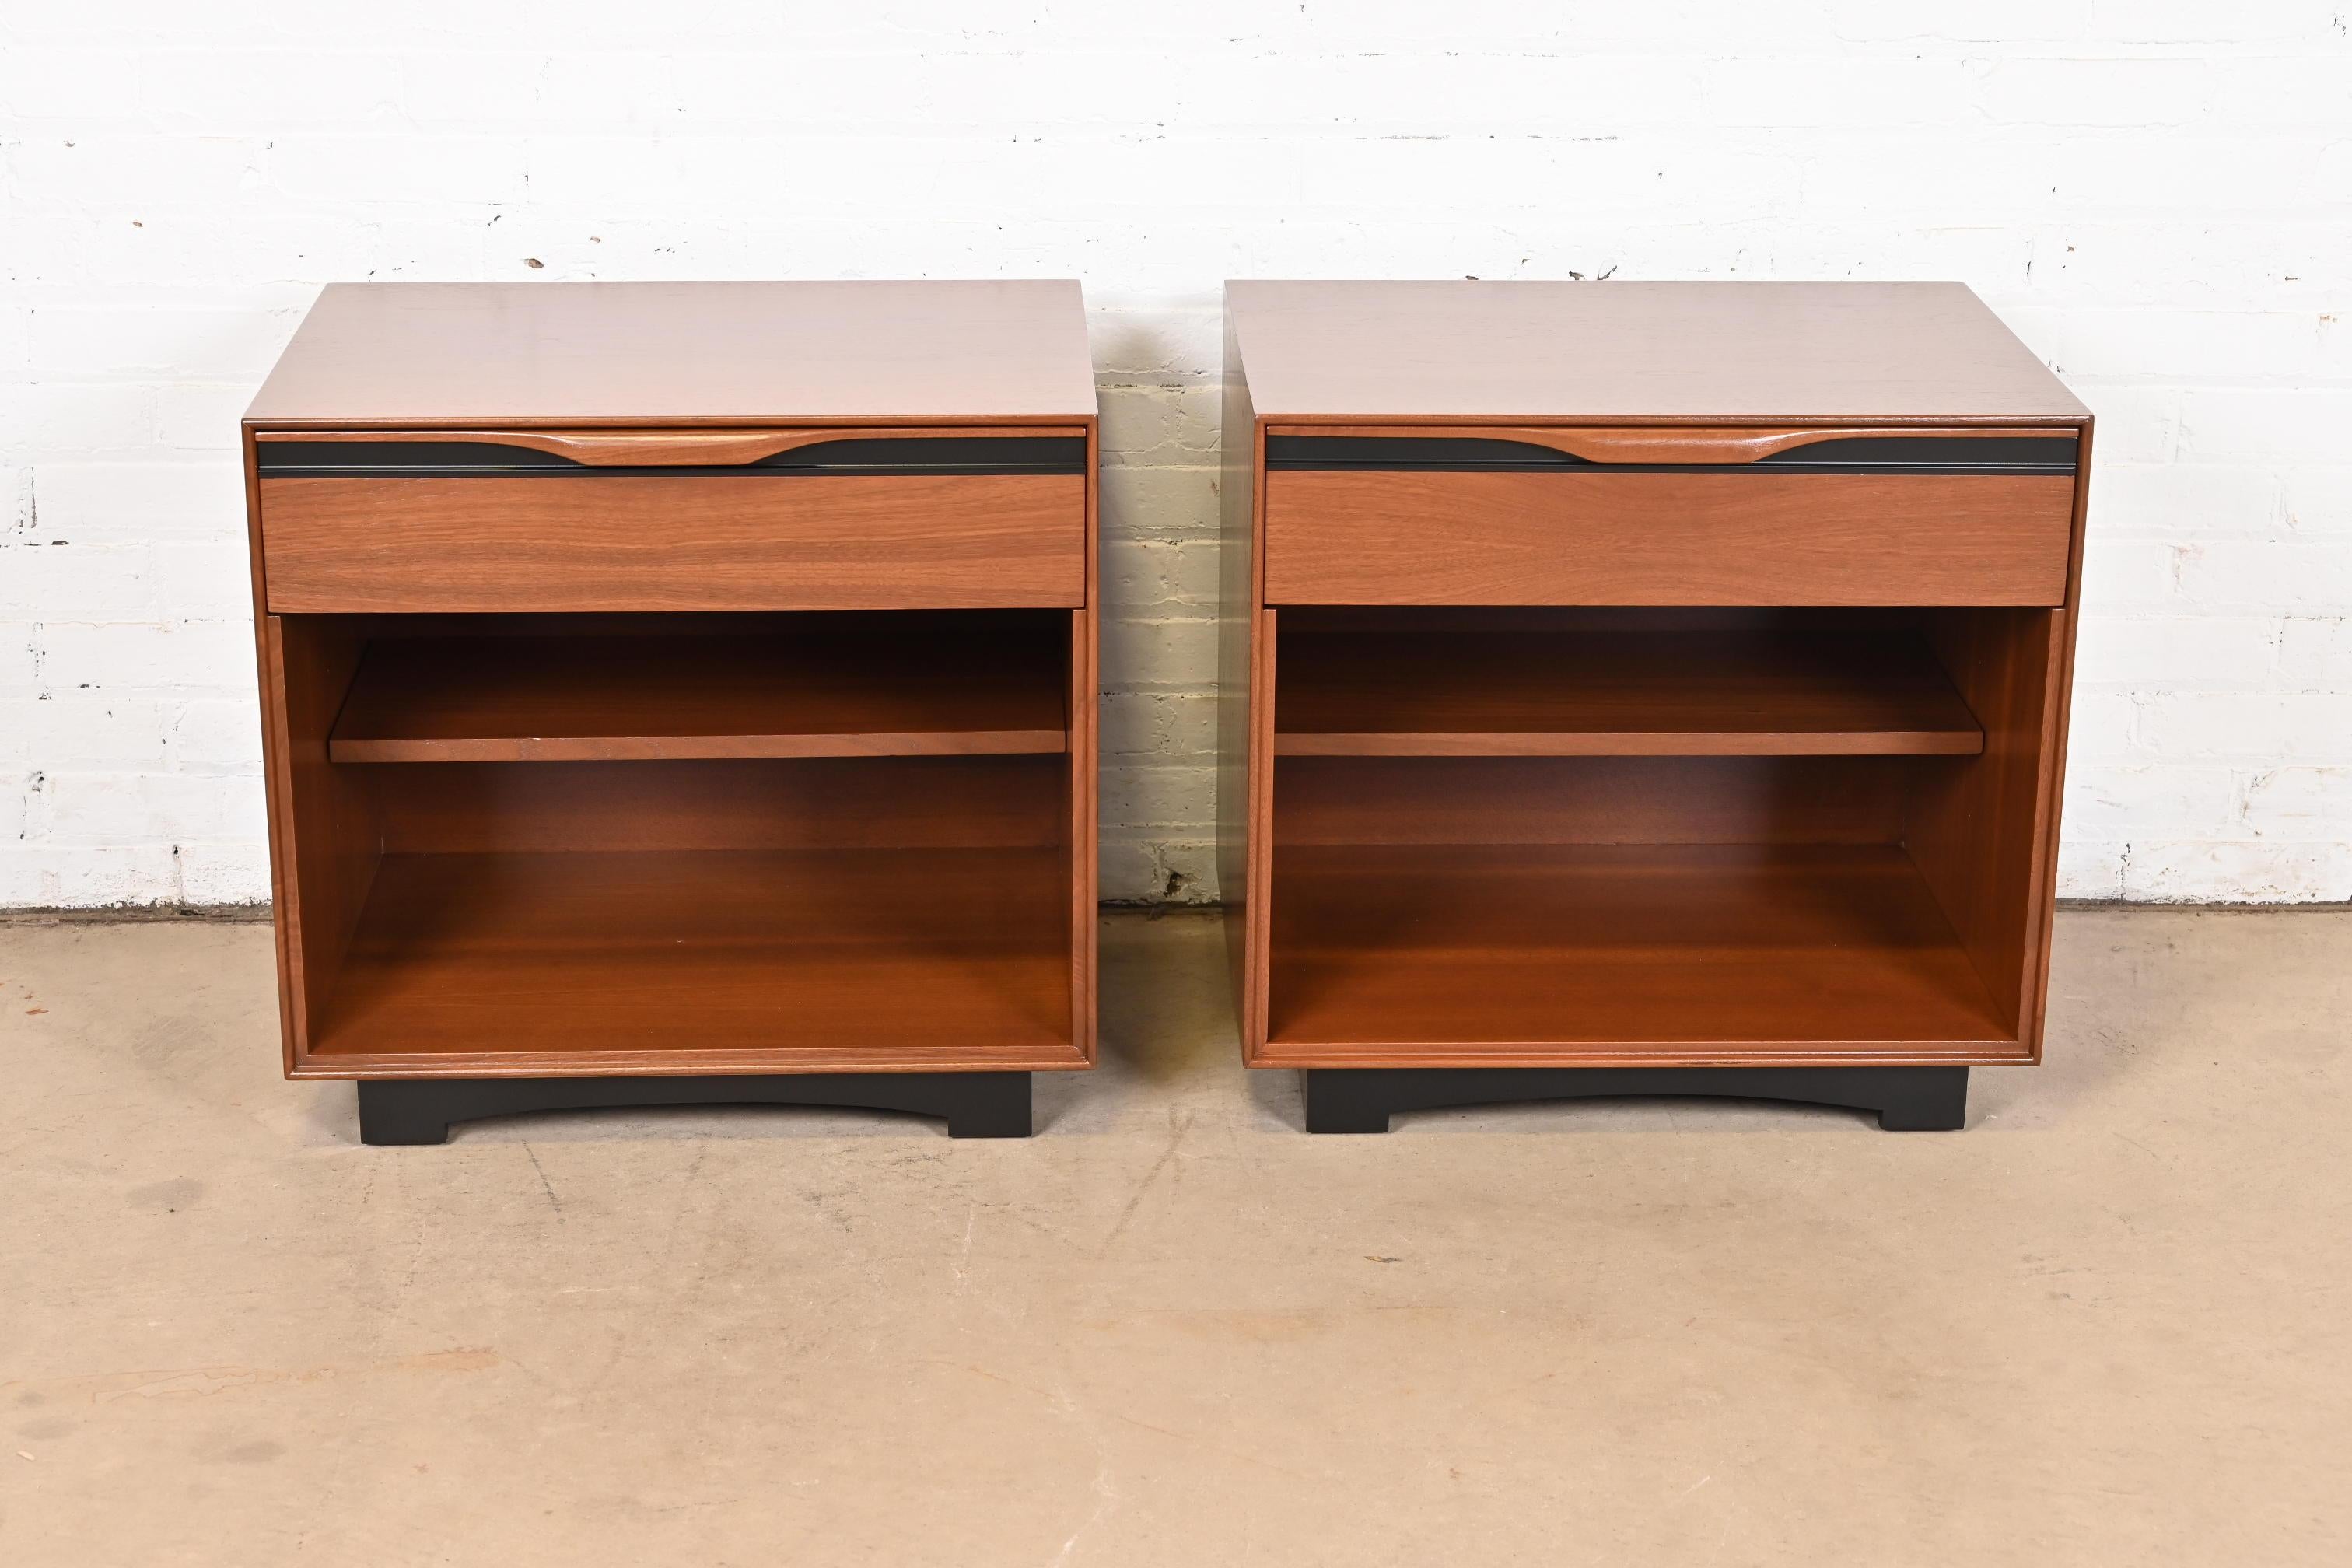 An exceptional pair of Mid-Century Modern sculpted walnut and black lacquered single-drawer nightstands

By John Kapel for Glenn of California and retailed by John Stuart

USA, 1960s

Walnut, with sculpted walnut drawer pulls and black lacquered